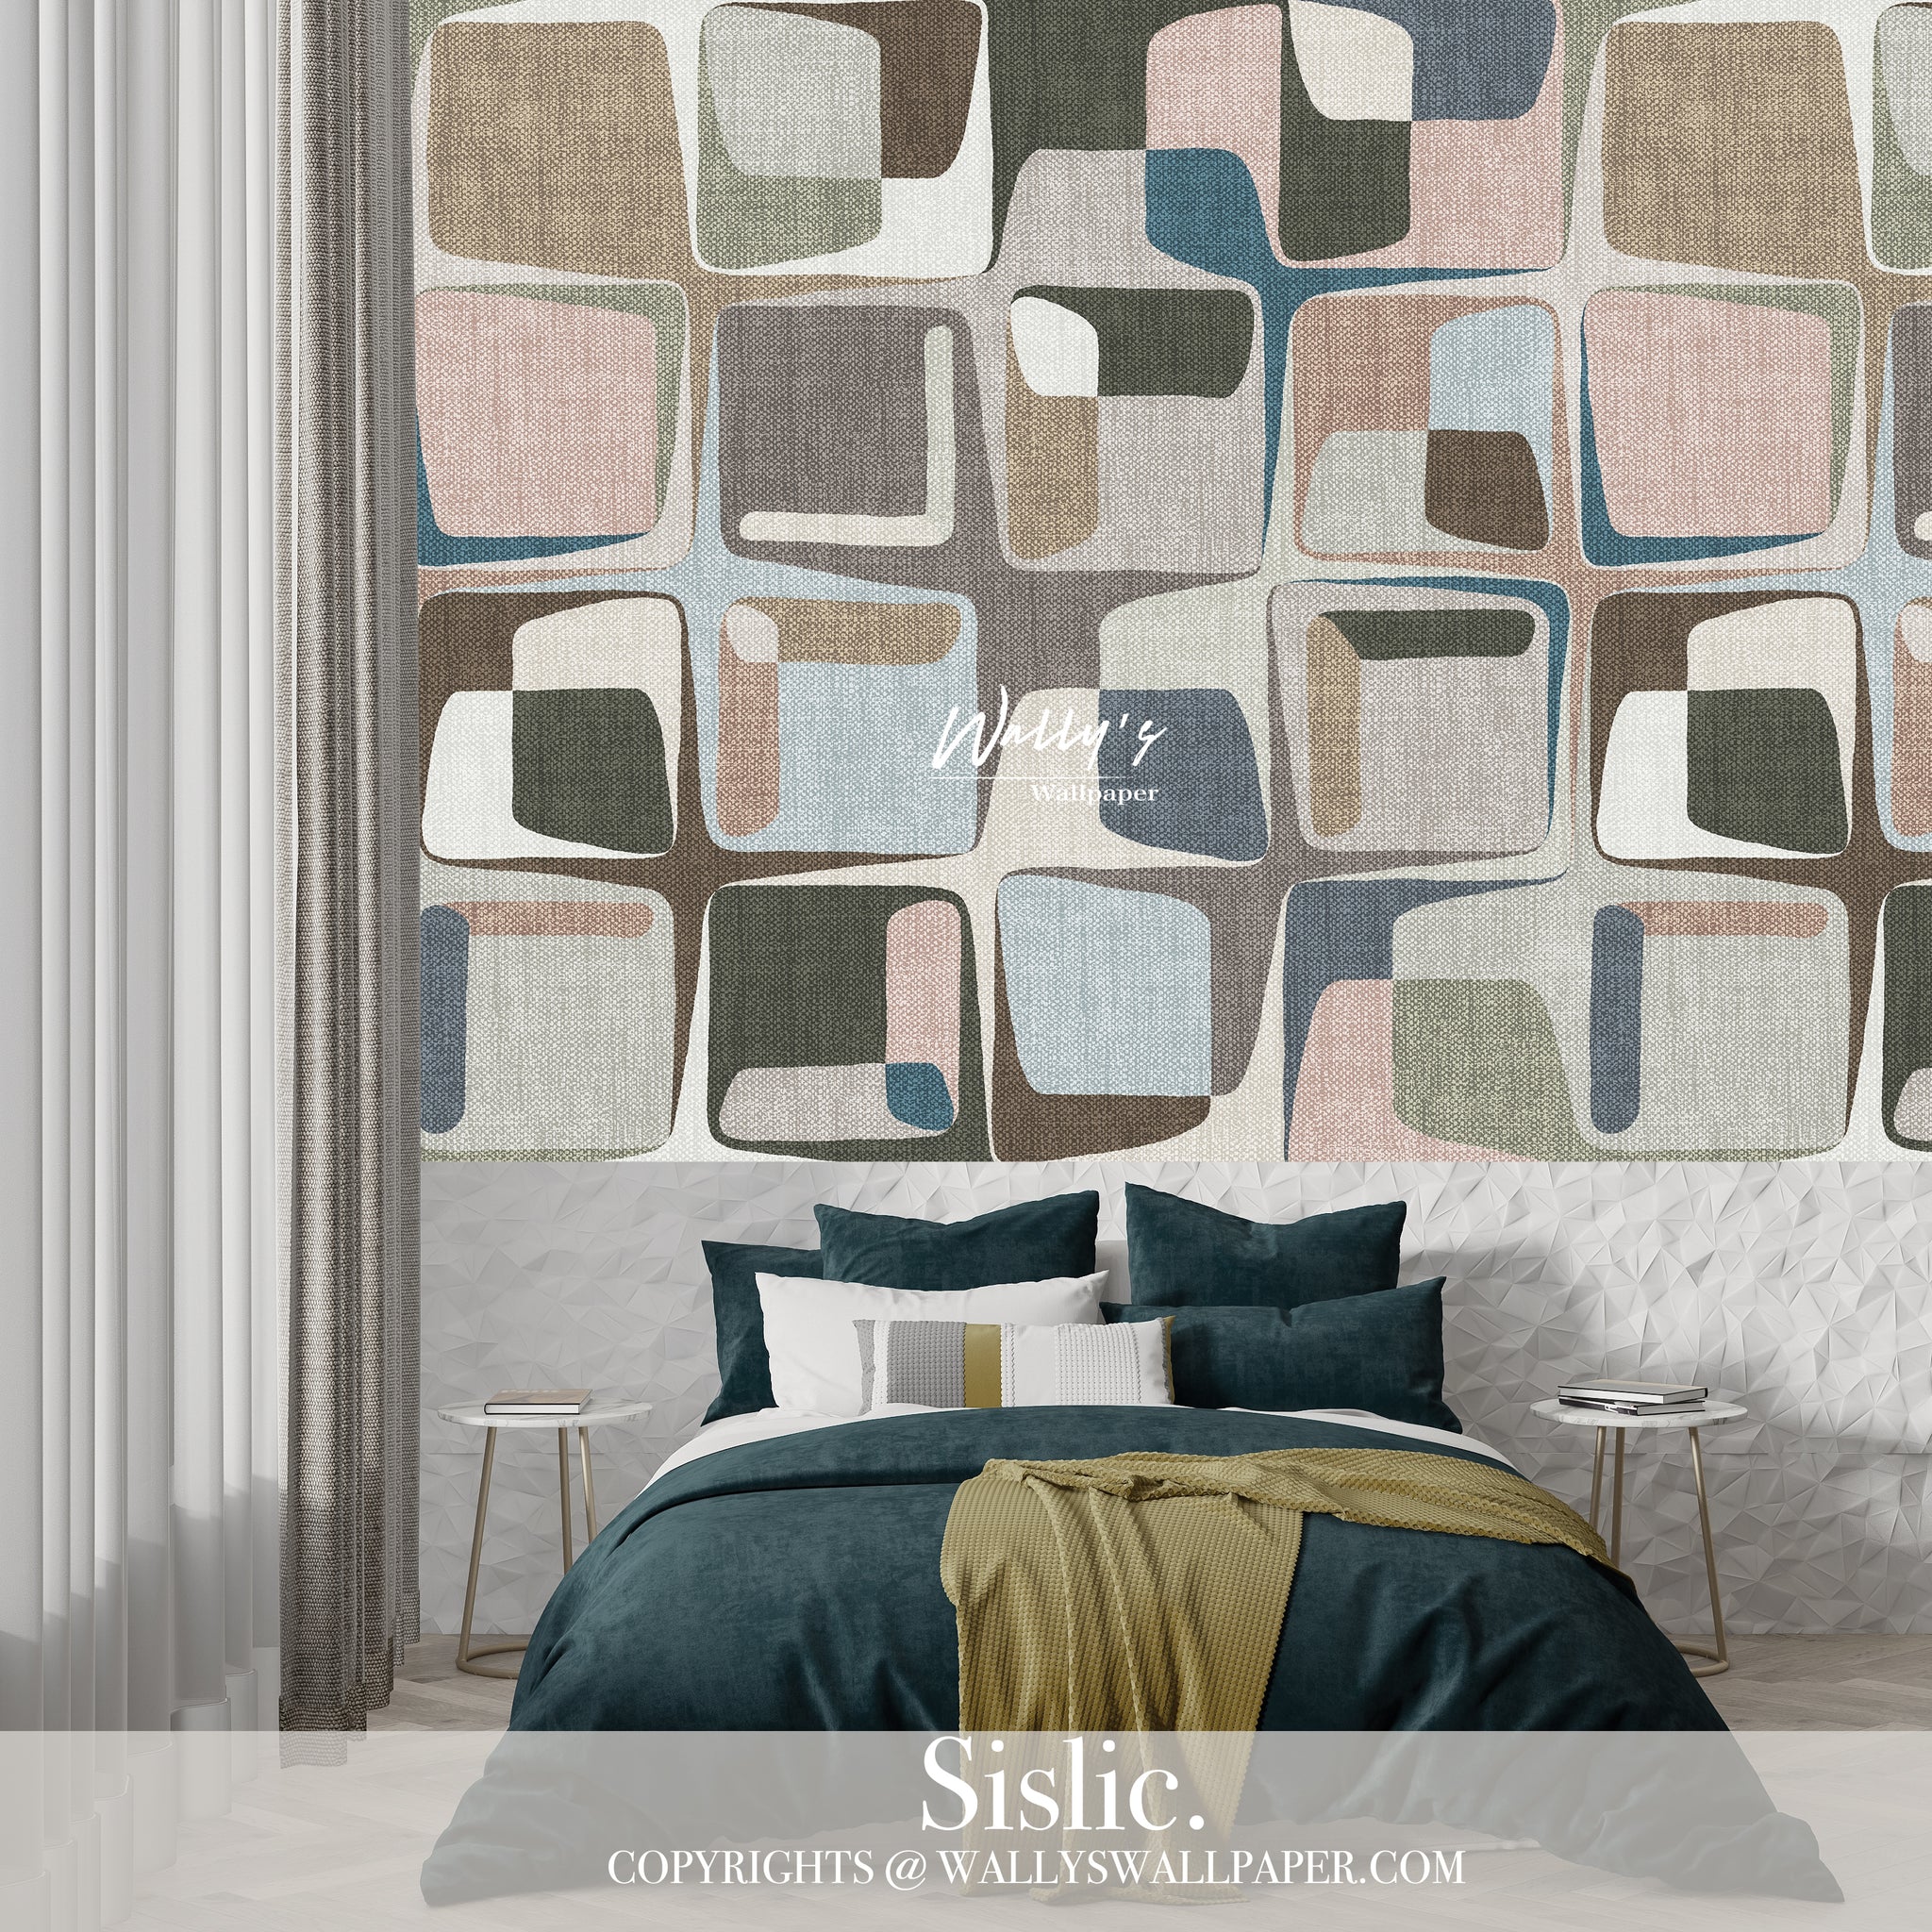 abstract of geometric patterns with linen texture colors Blue , Beige, Brown , orange in front of bed, in a cozy Bedroom, Best High-Quality Wallpaper in Egypt, and Middle East 